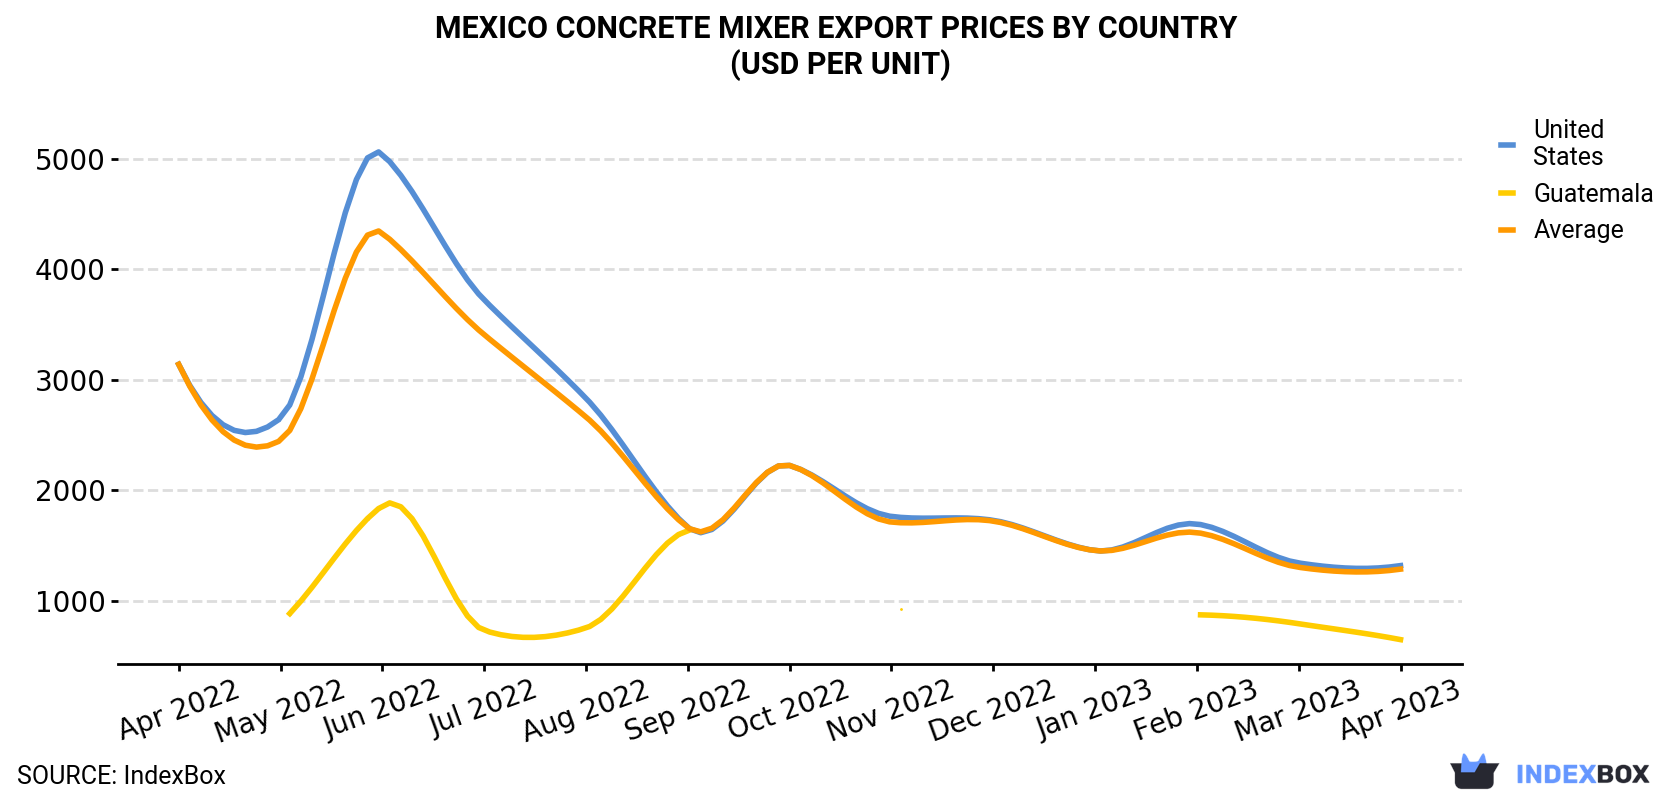 Mexico Concrete Mixer Export Prices By Country (USD Per Unit)